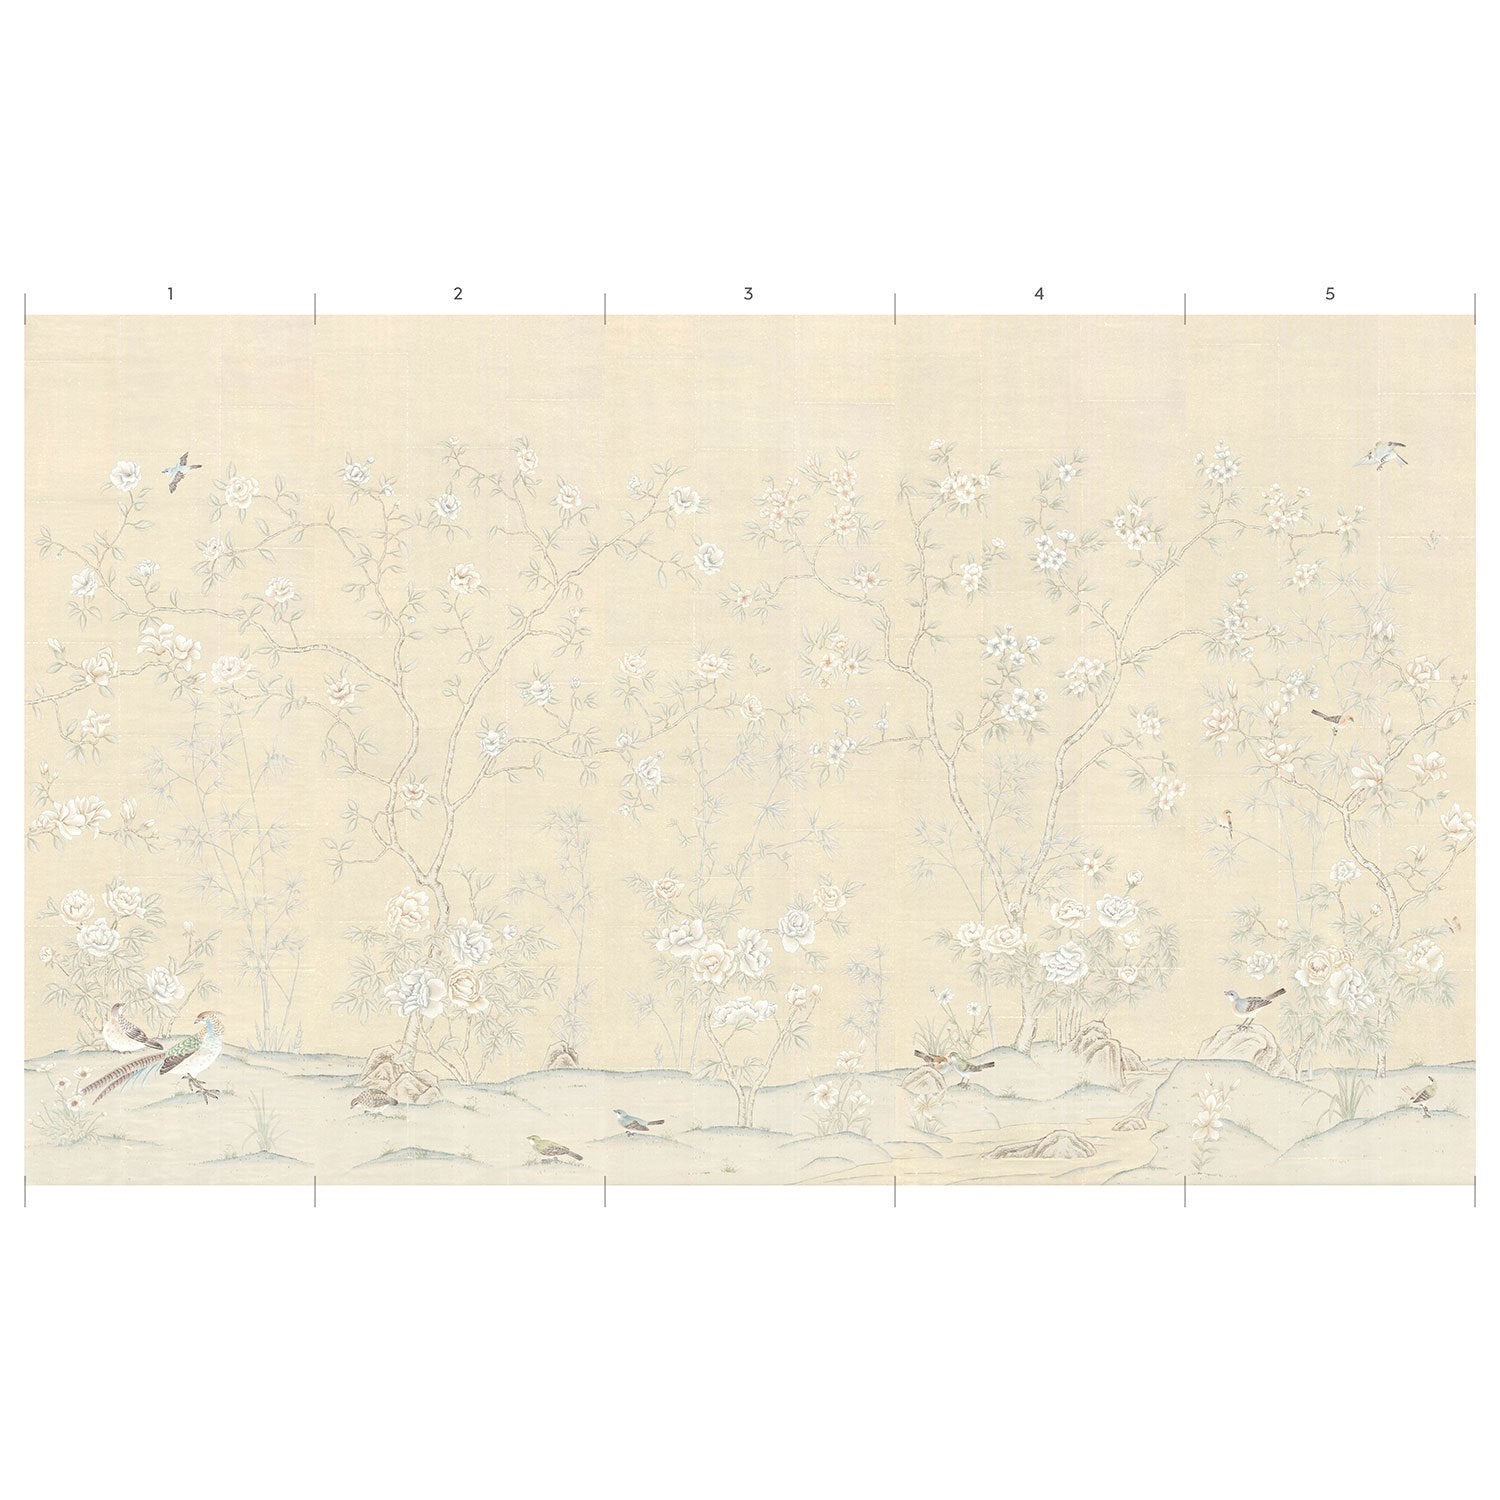 Mural Panels of Vincennes in Cream Chinoiserie Wallpaper